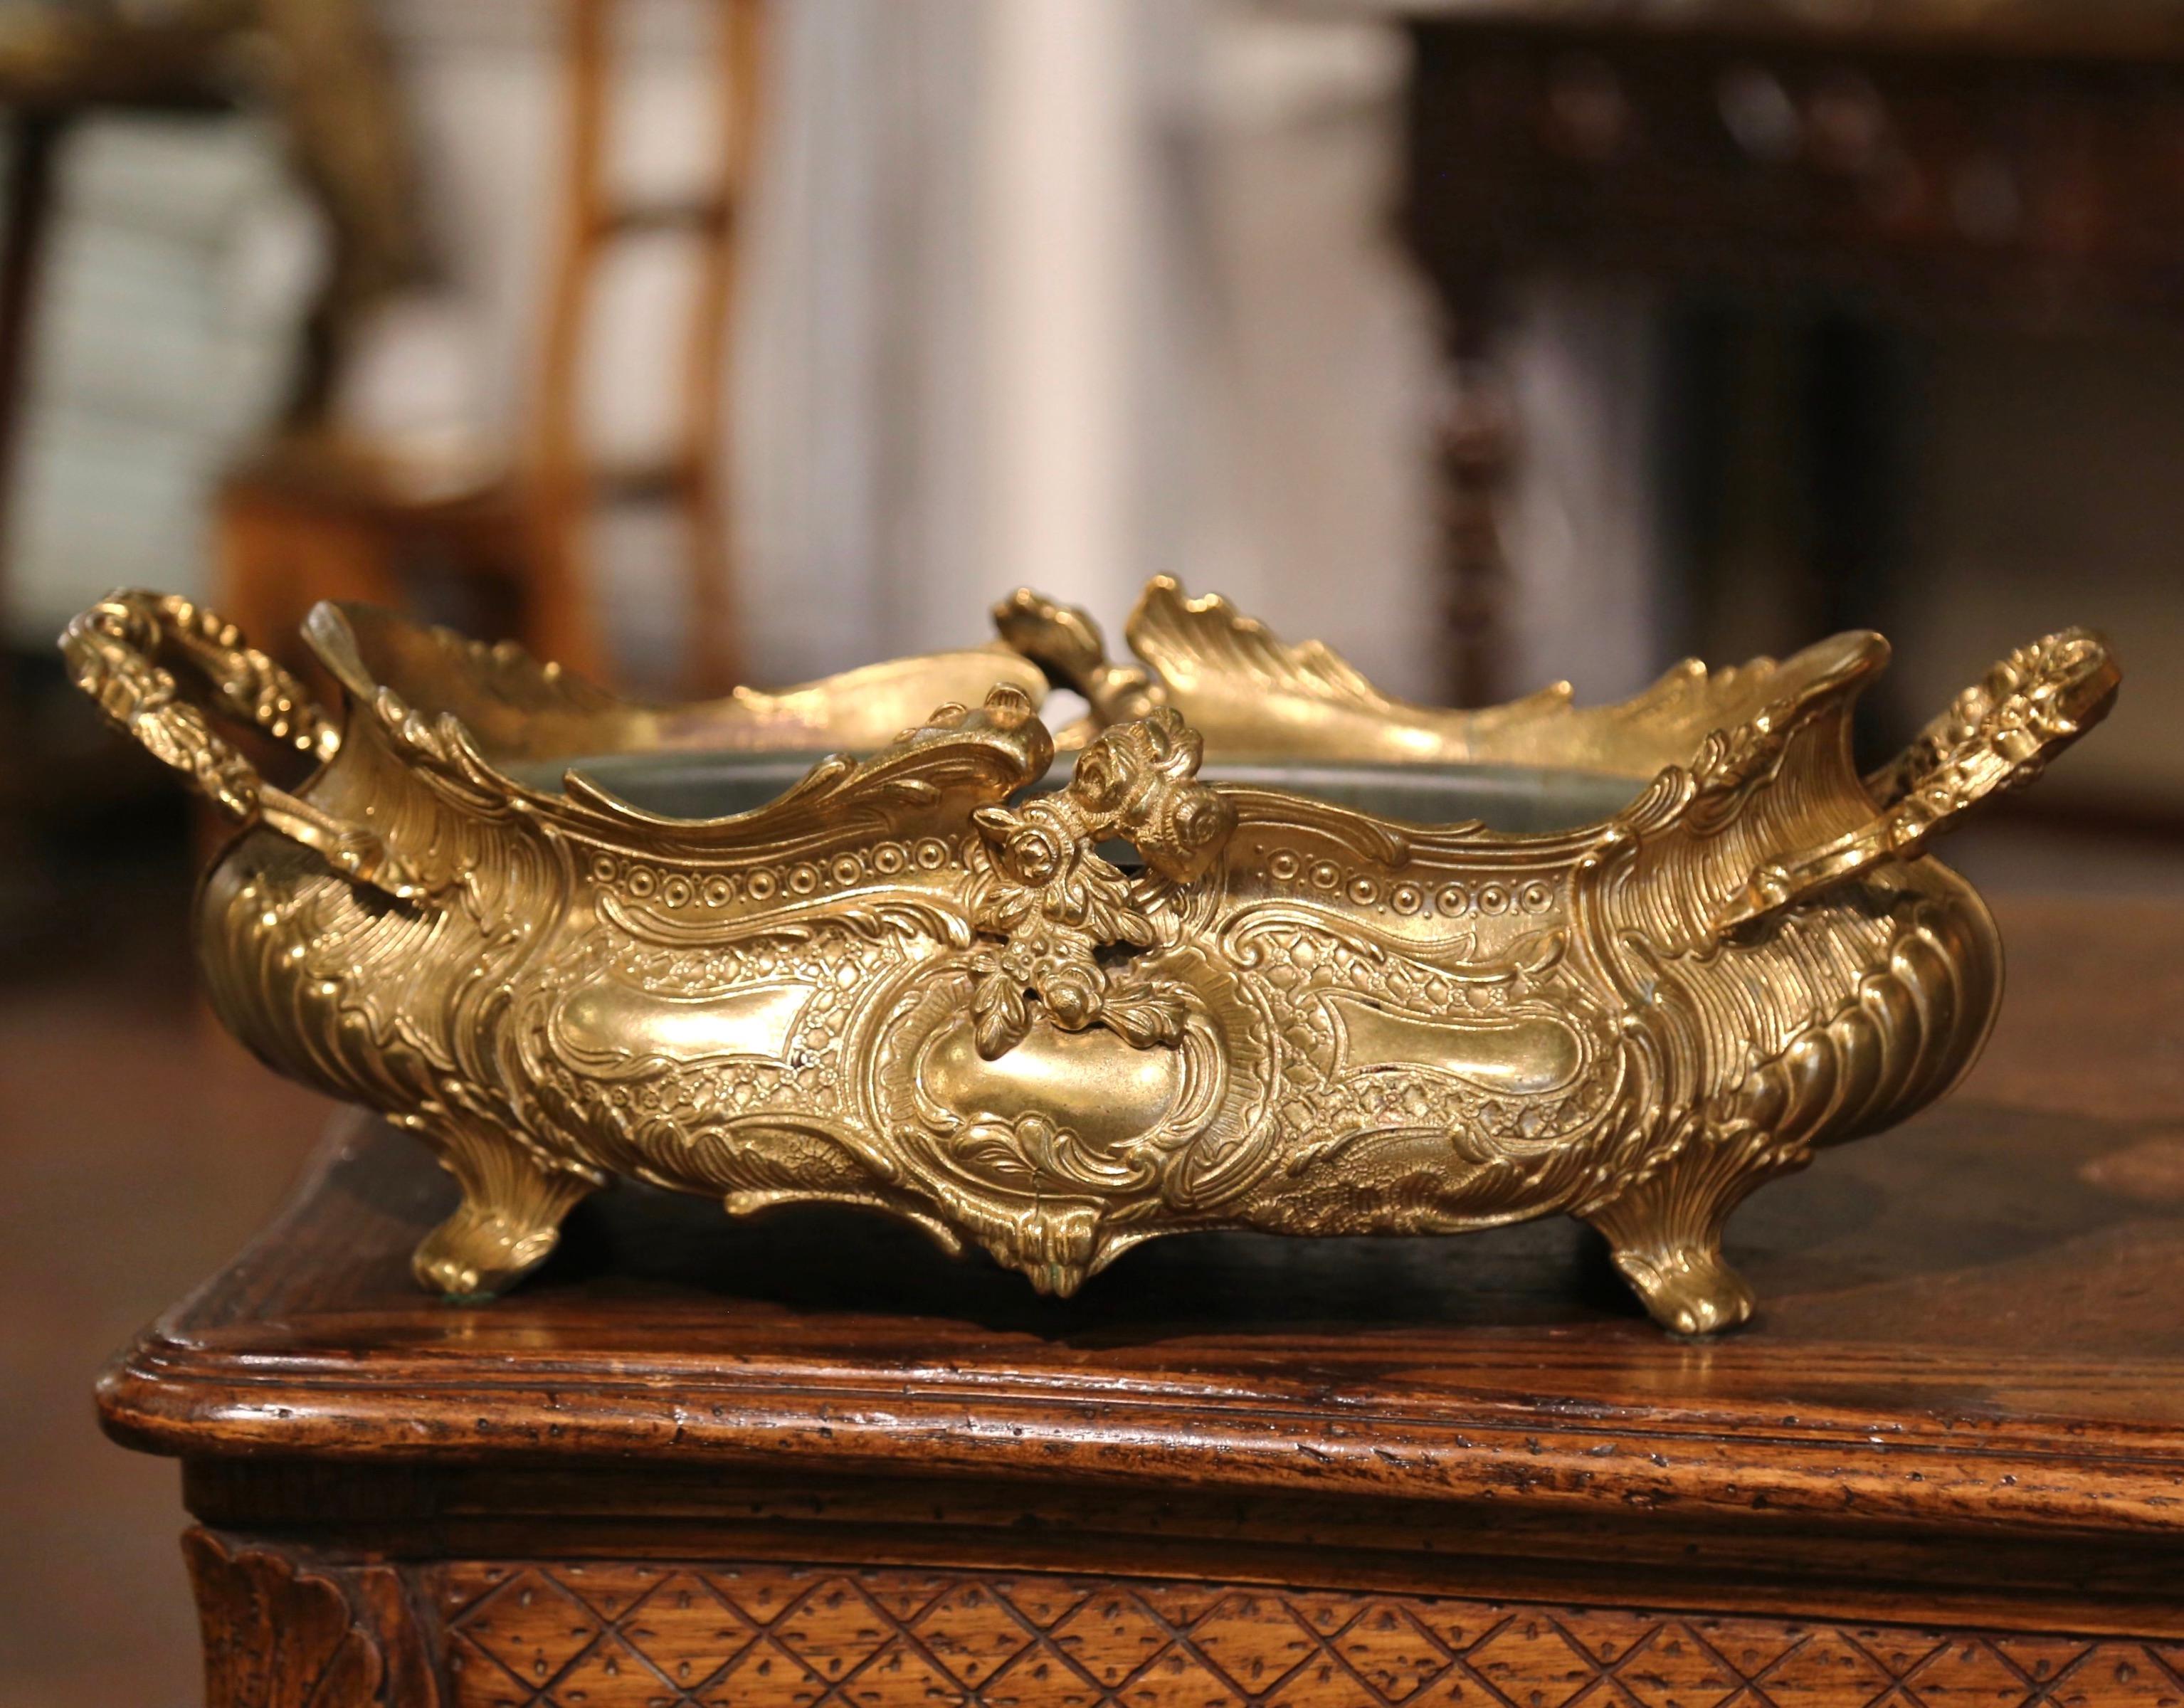 This elegant bronze jardinière with repousse motifs was created in Italy, circa 1990. The oblong vintage planter dressed with side handles, sits on small curved feet decorated with acanthus leaf motifs, over a scalloped apron embellished with shell